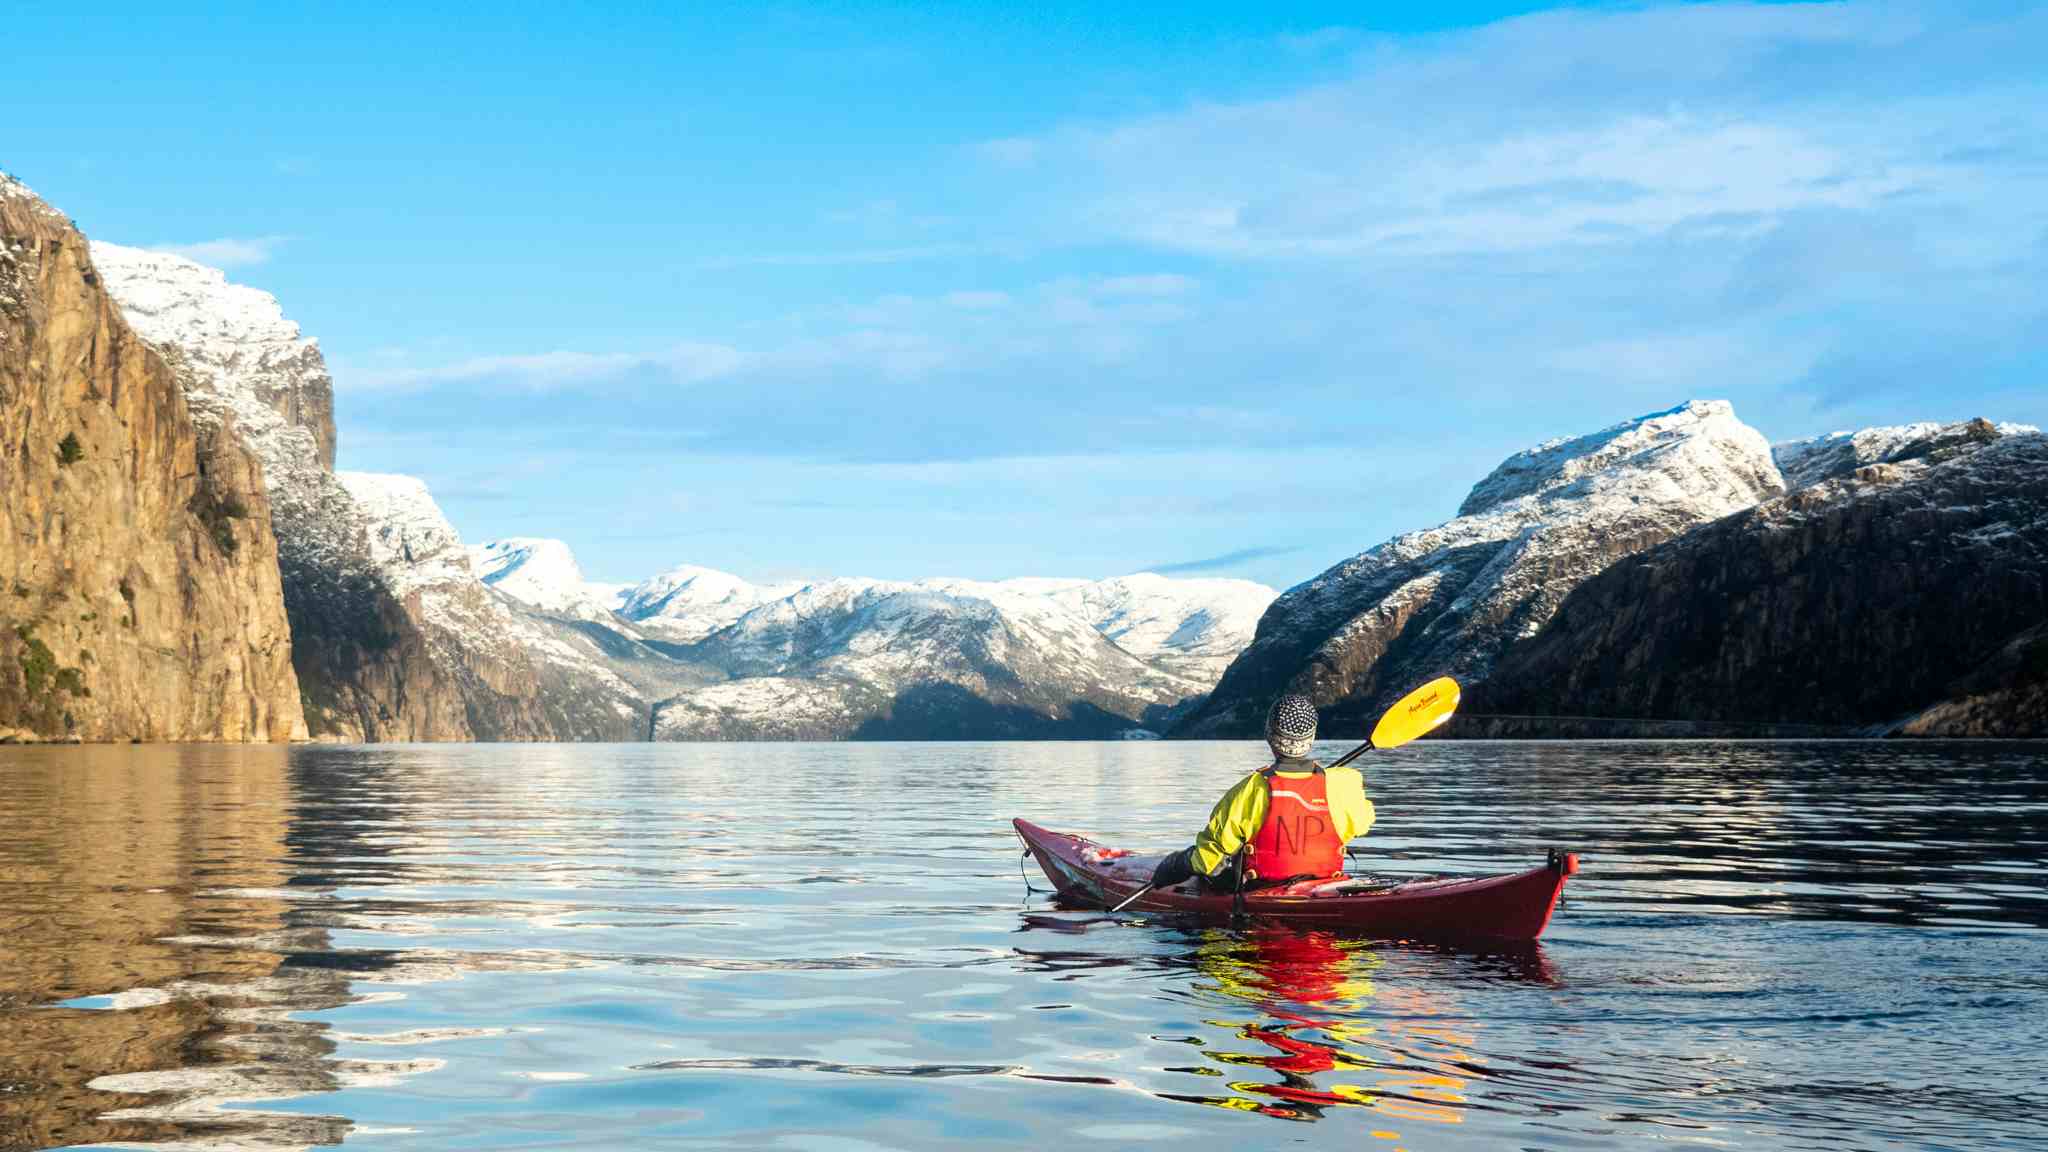 kayaking in winter in the Lysefjord, Norway, mountains with snow-capped tops